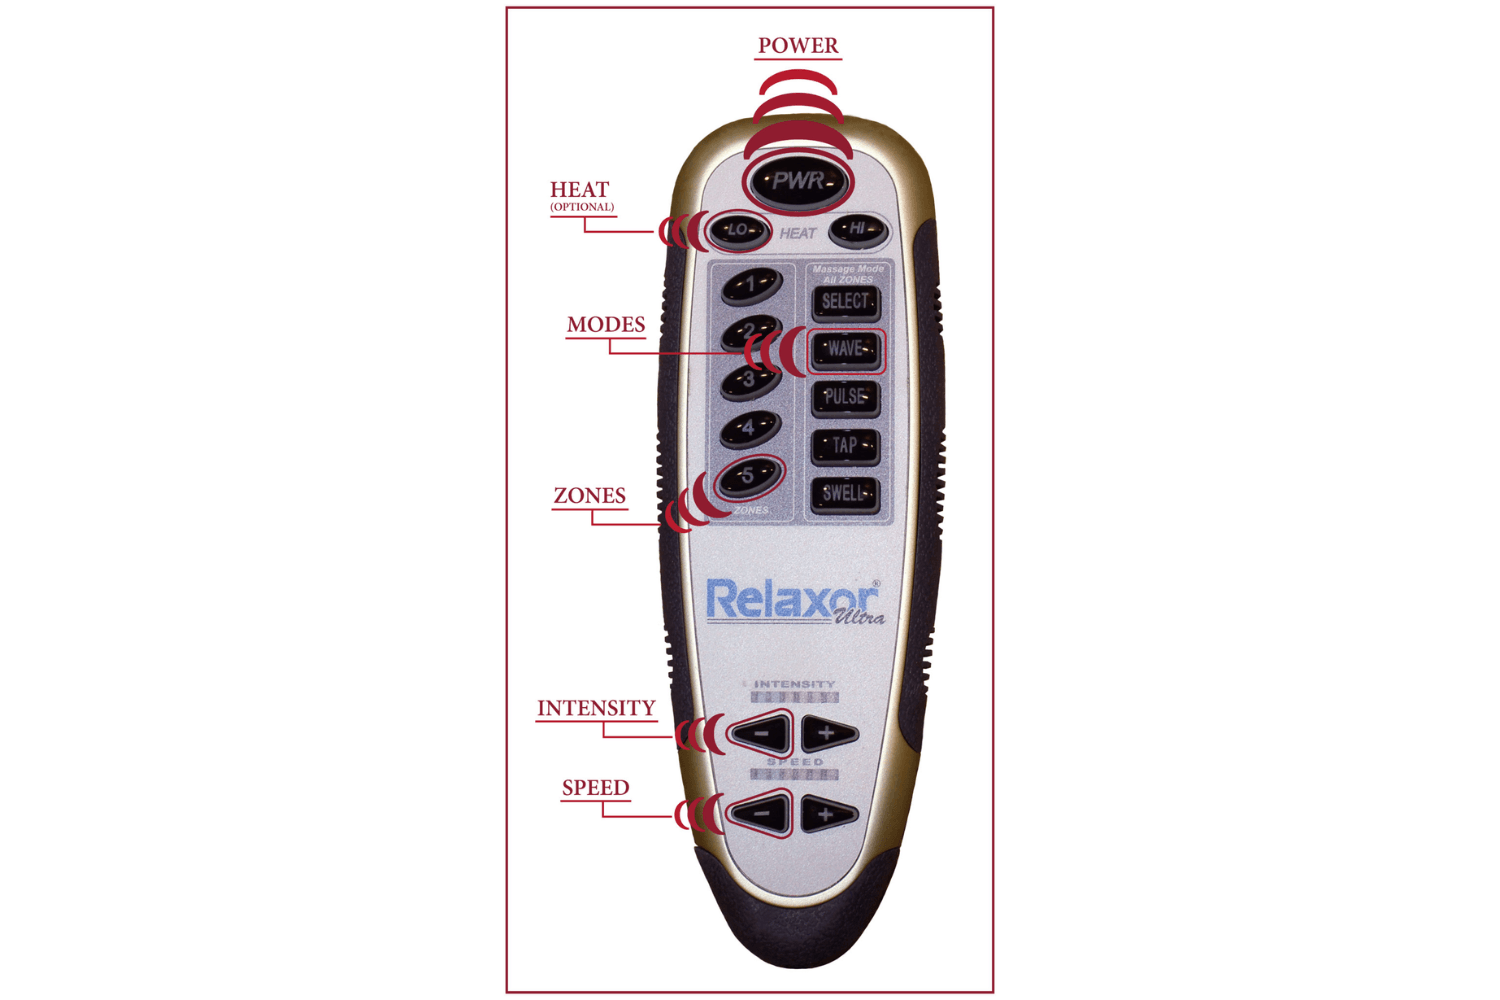 Our Relaxor Remote for heat and massage